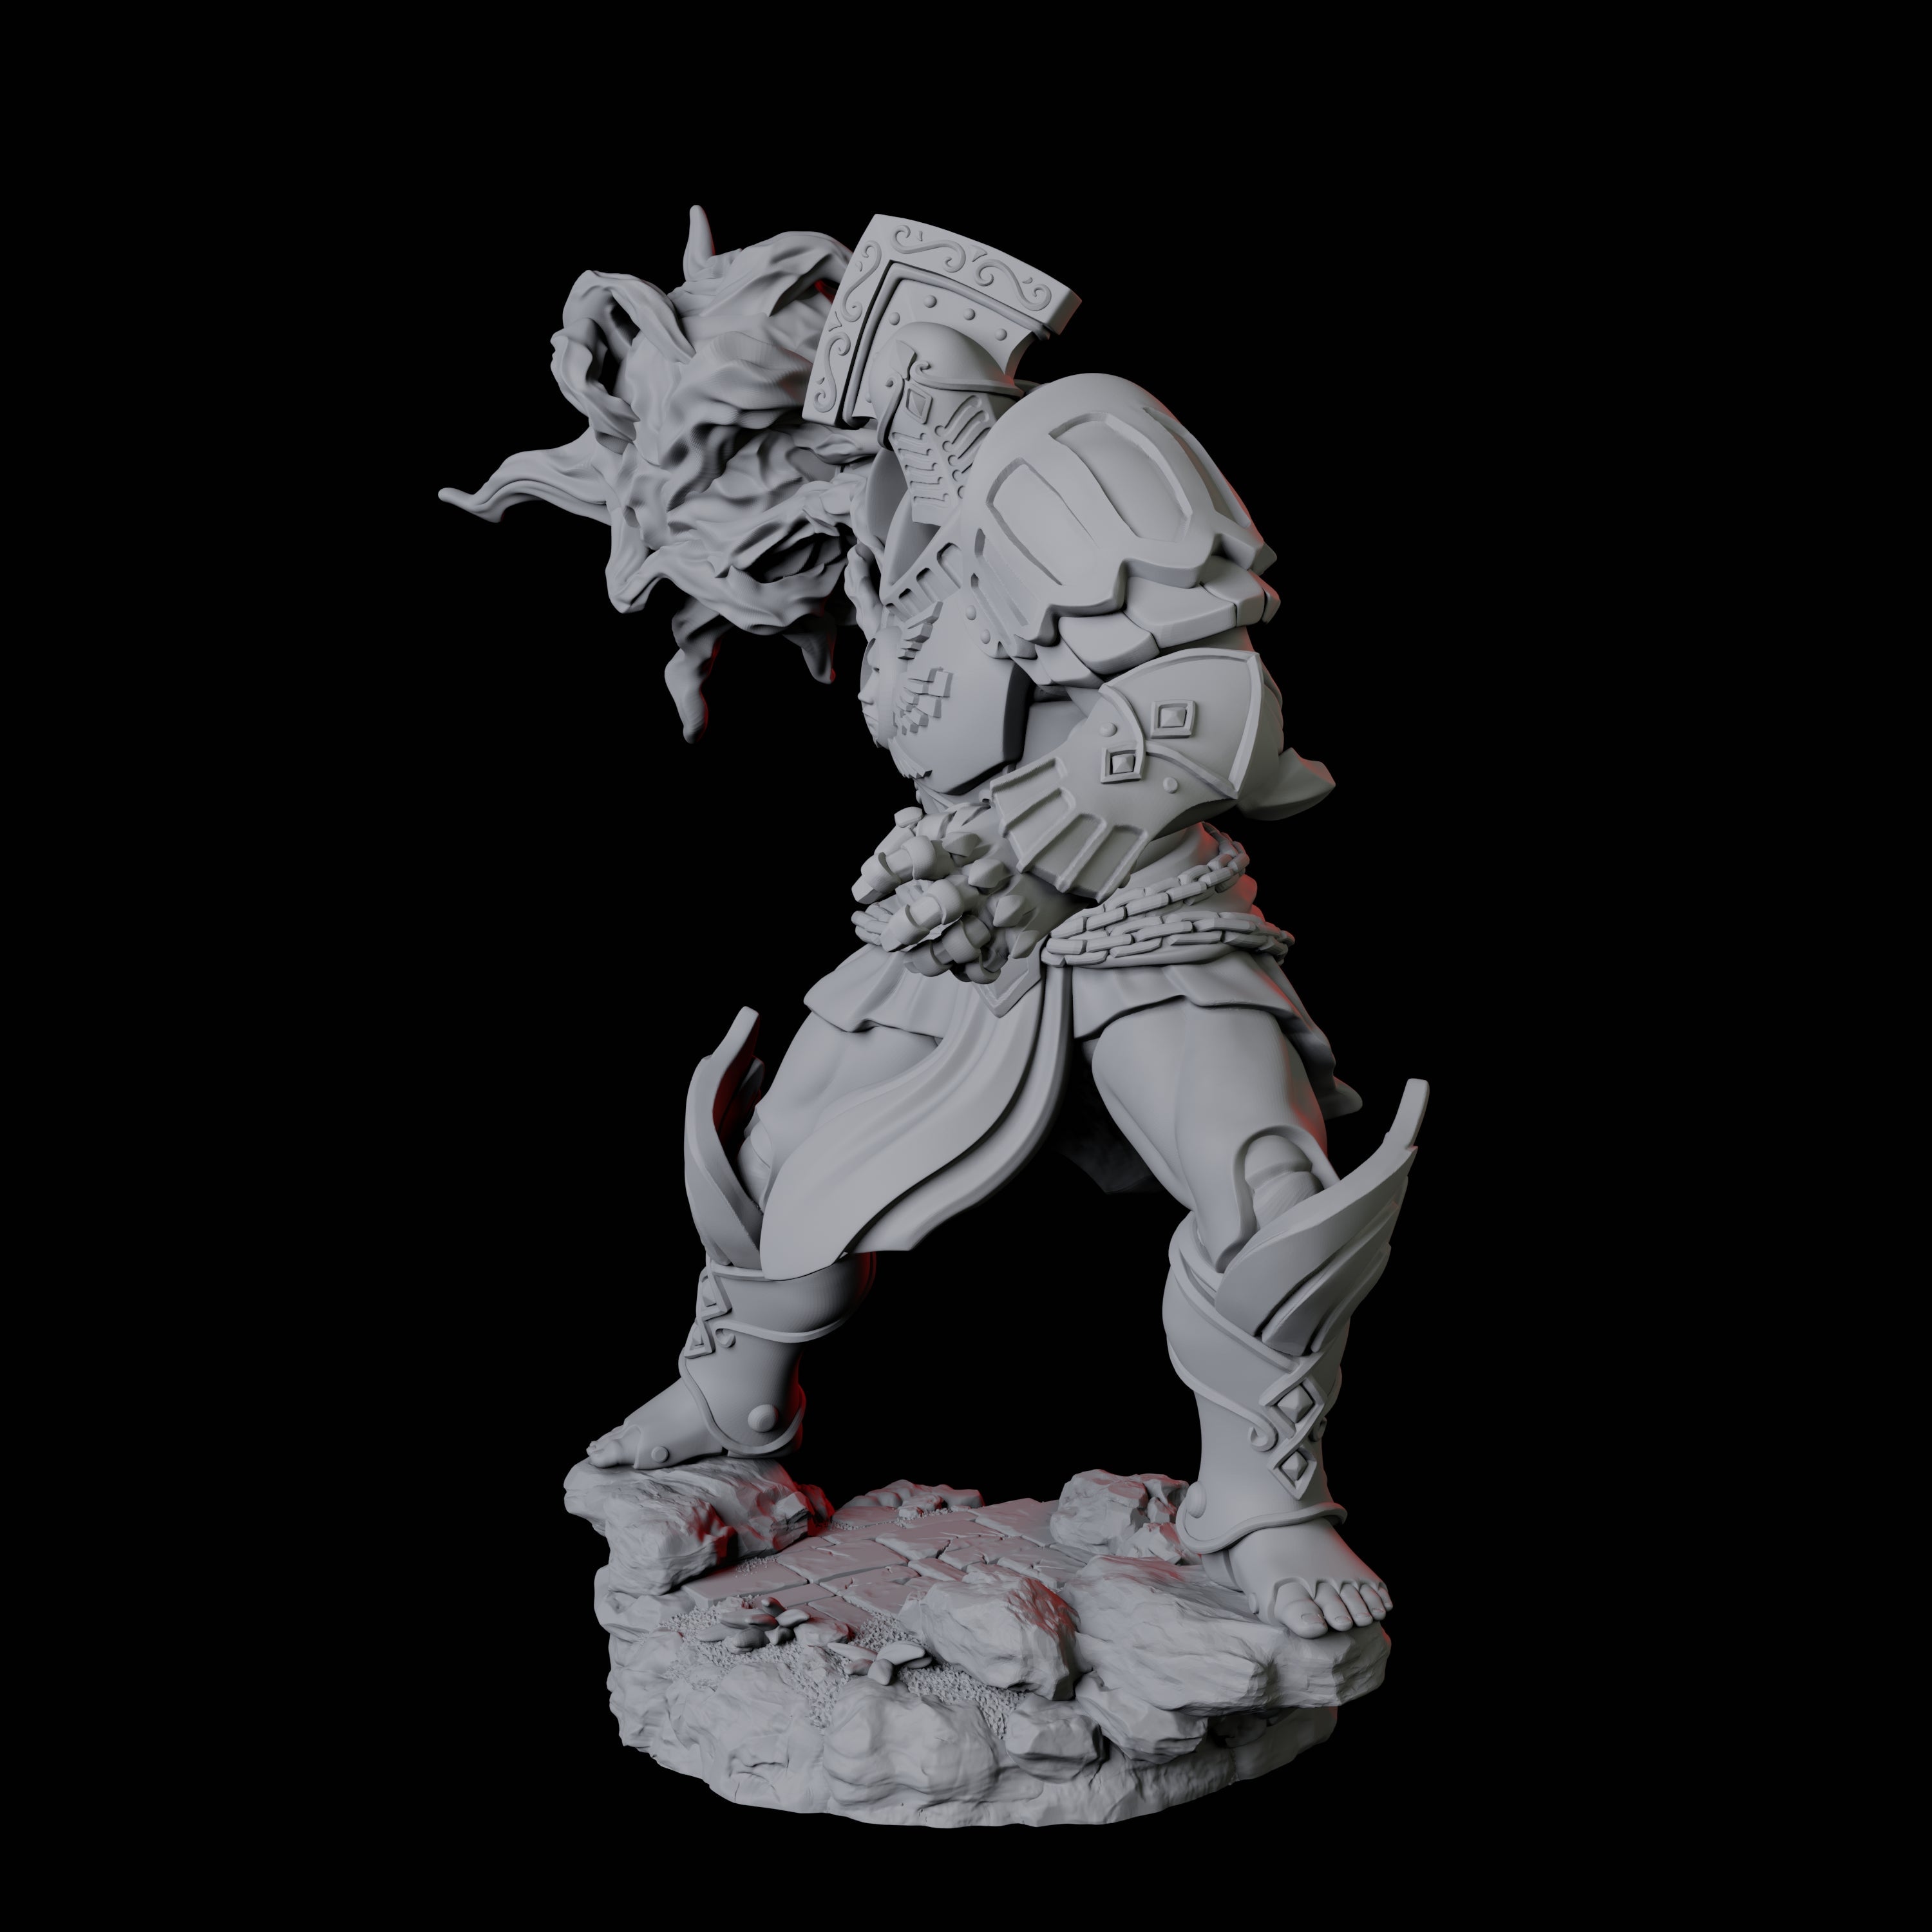 Striking Paladin Miniature for Dungeons and Dragons, Pathfinder or other TTRPGs